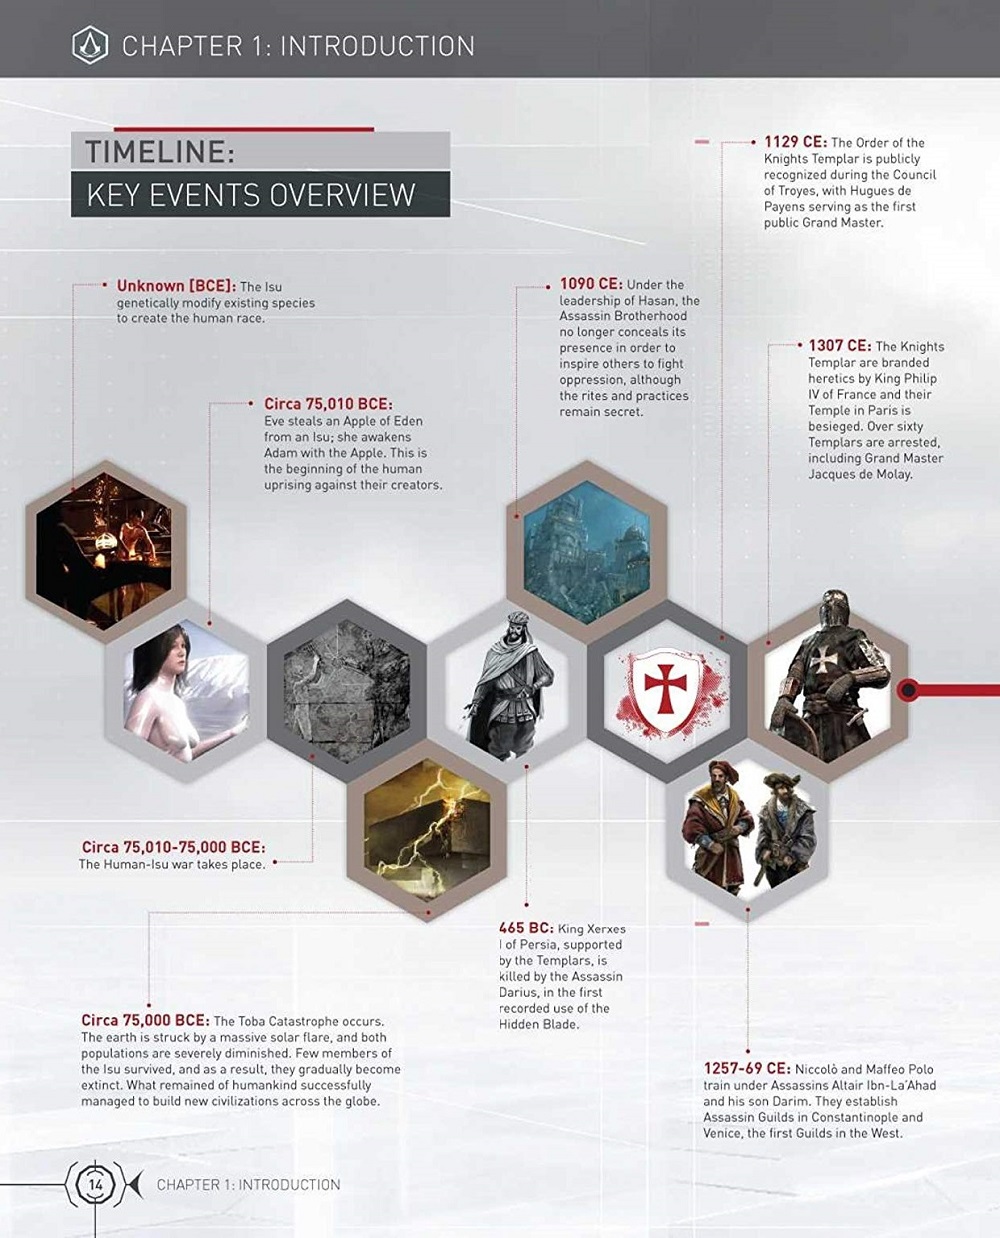 Assassin's Creed: The Essential Guide by Ubisoft